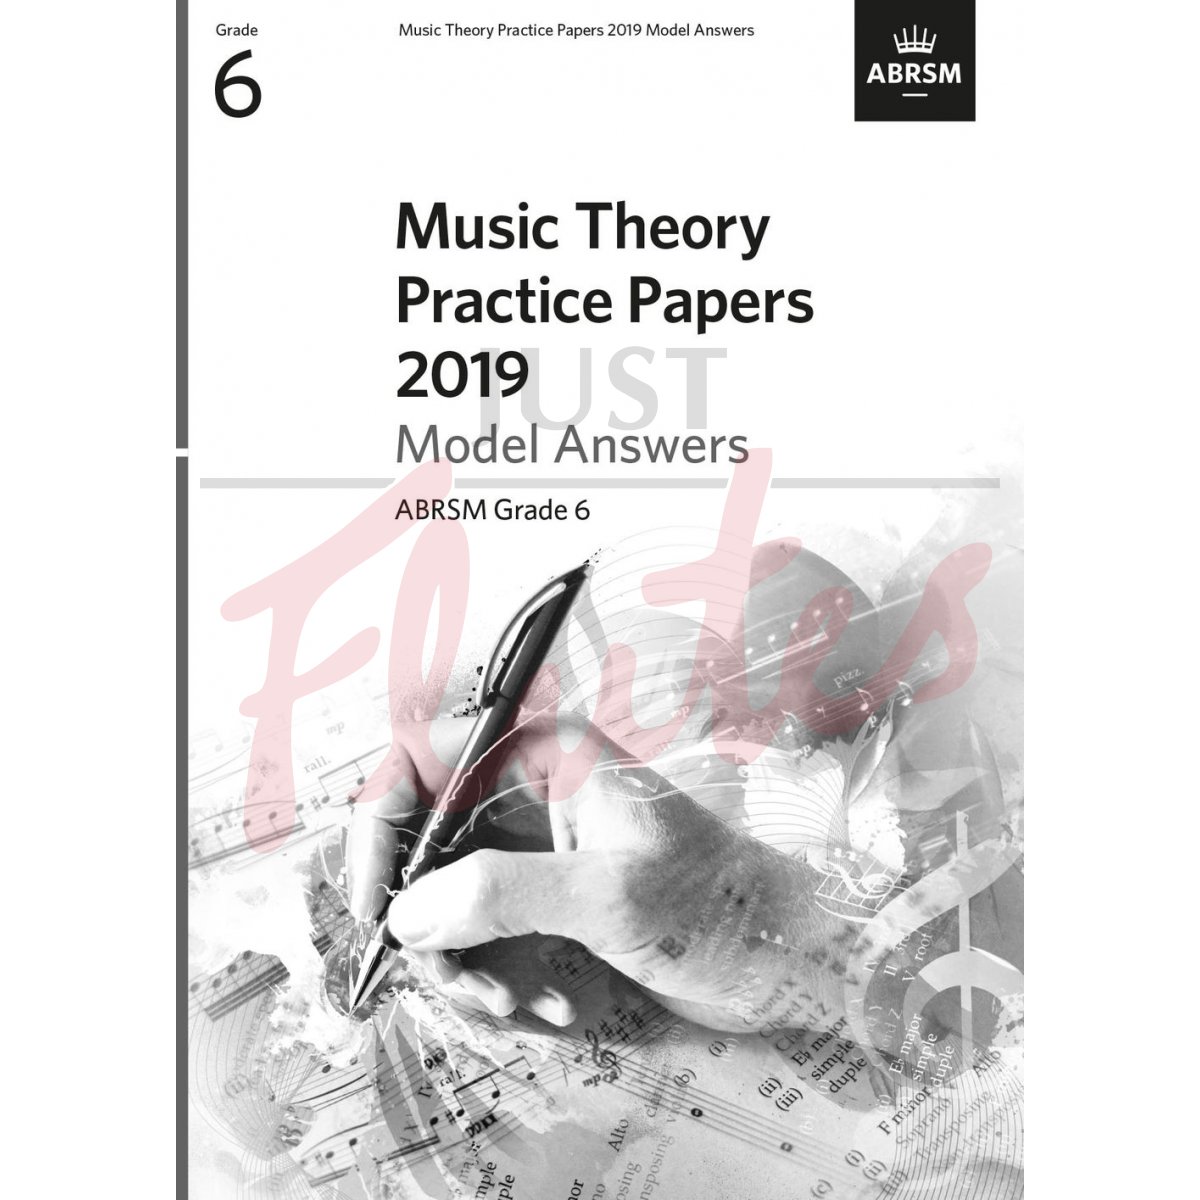 Music Theory Practice Papers 2019 Grade 6 - Model Answers